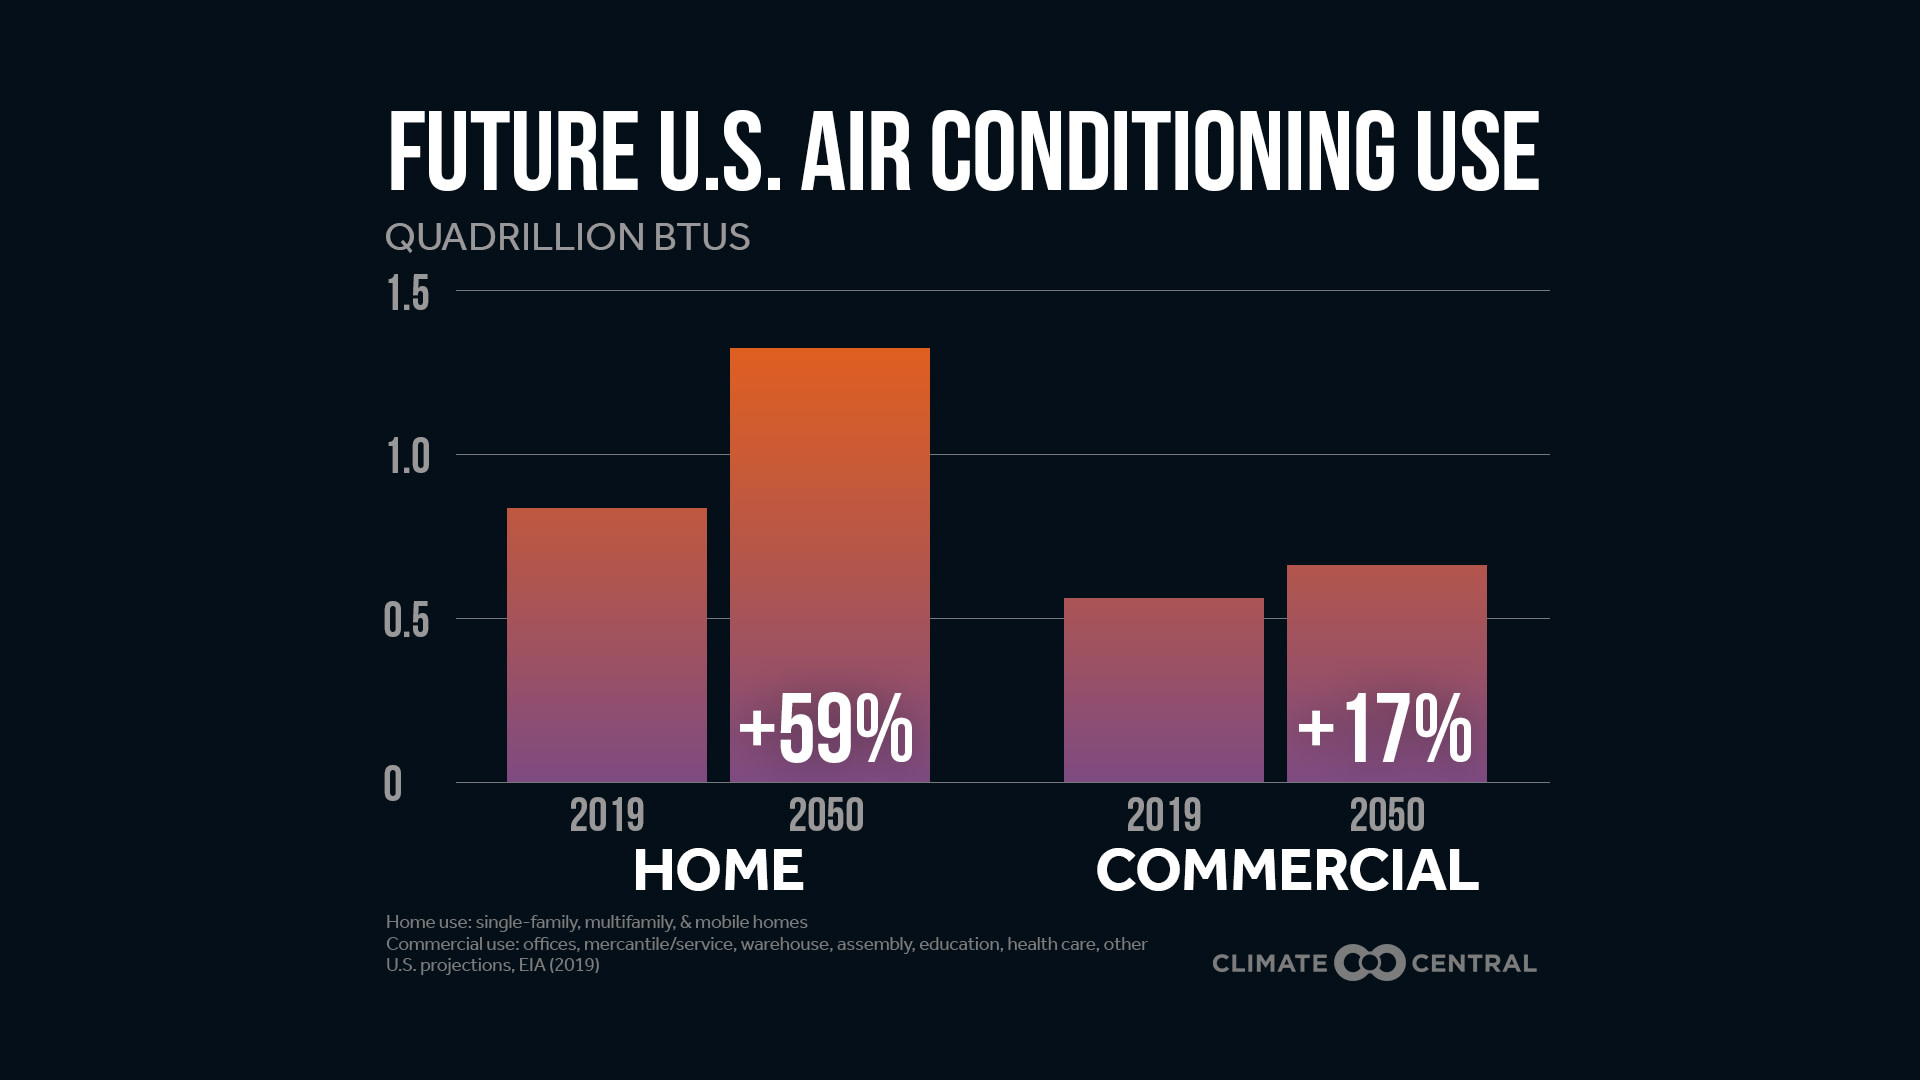 Future U.S. Air Conditioning Use - Hotter Climate, More Cooling Demand